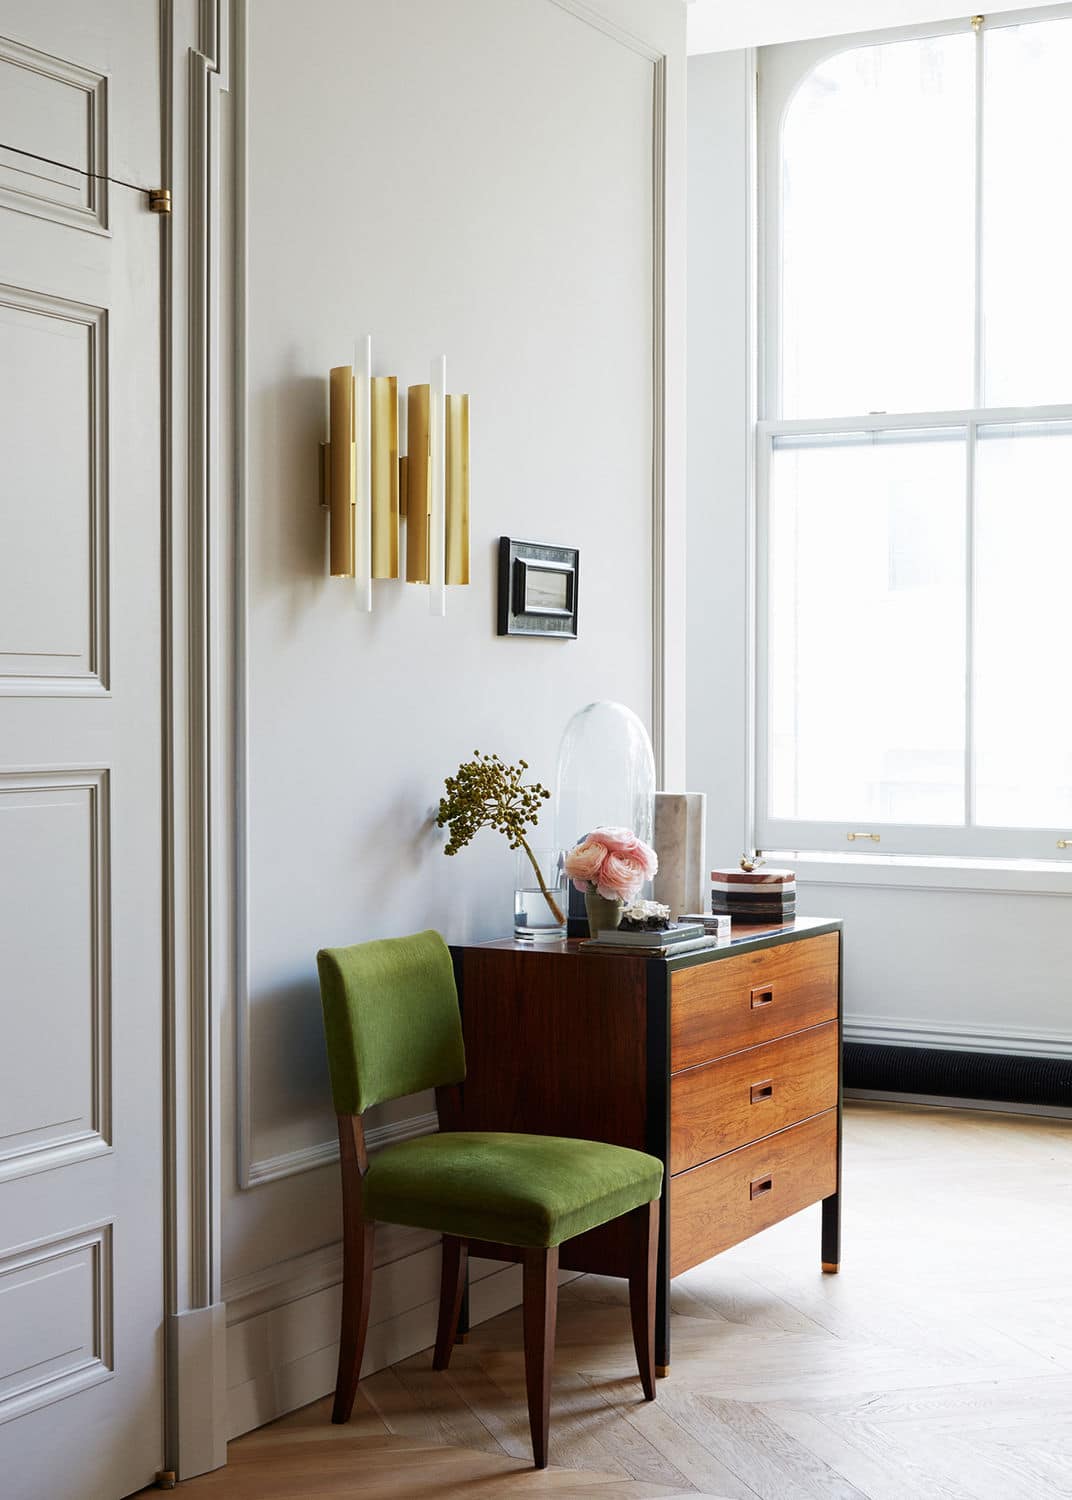 a hallway vignette with eclectic furnishings | jenna lyons house tour on coco kelley